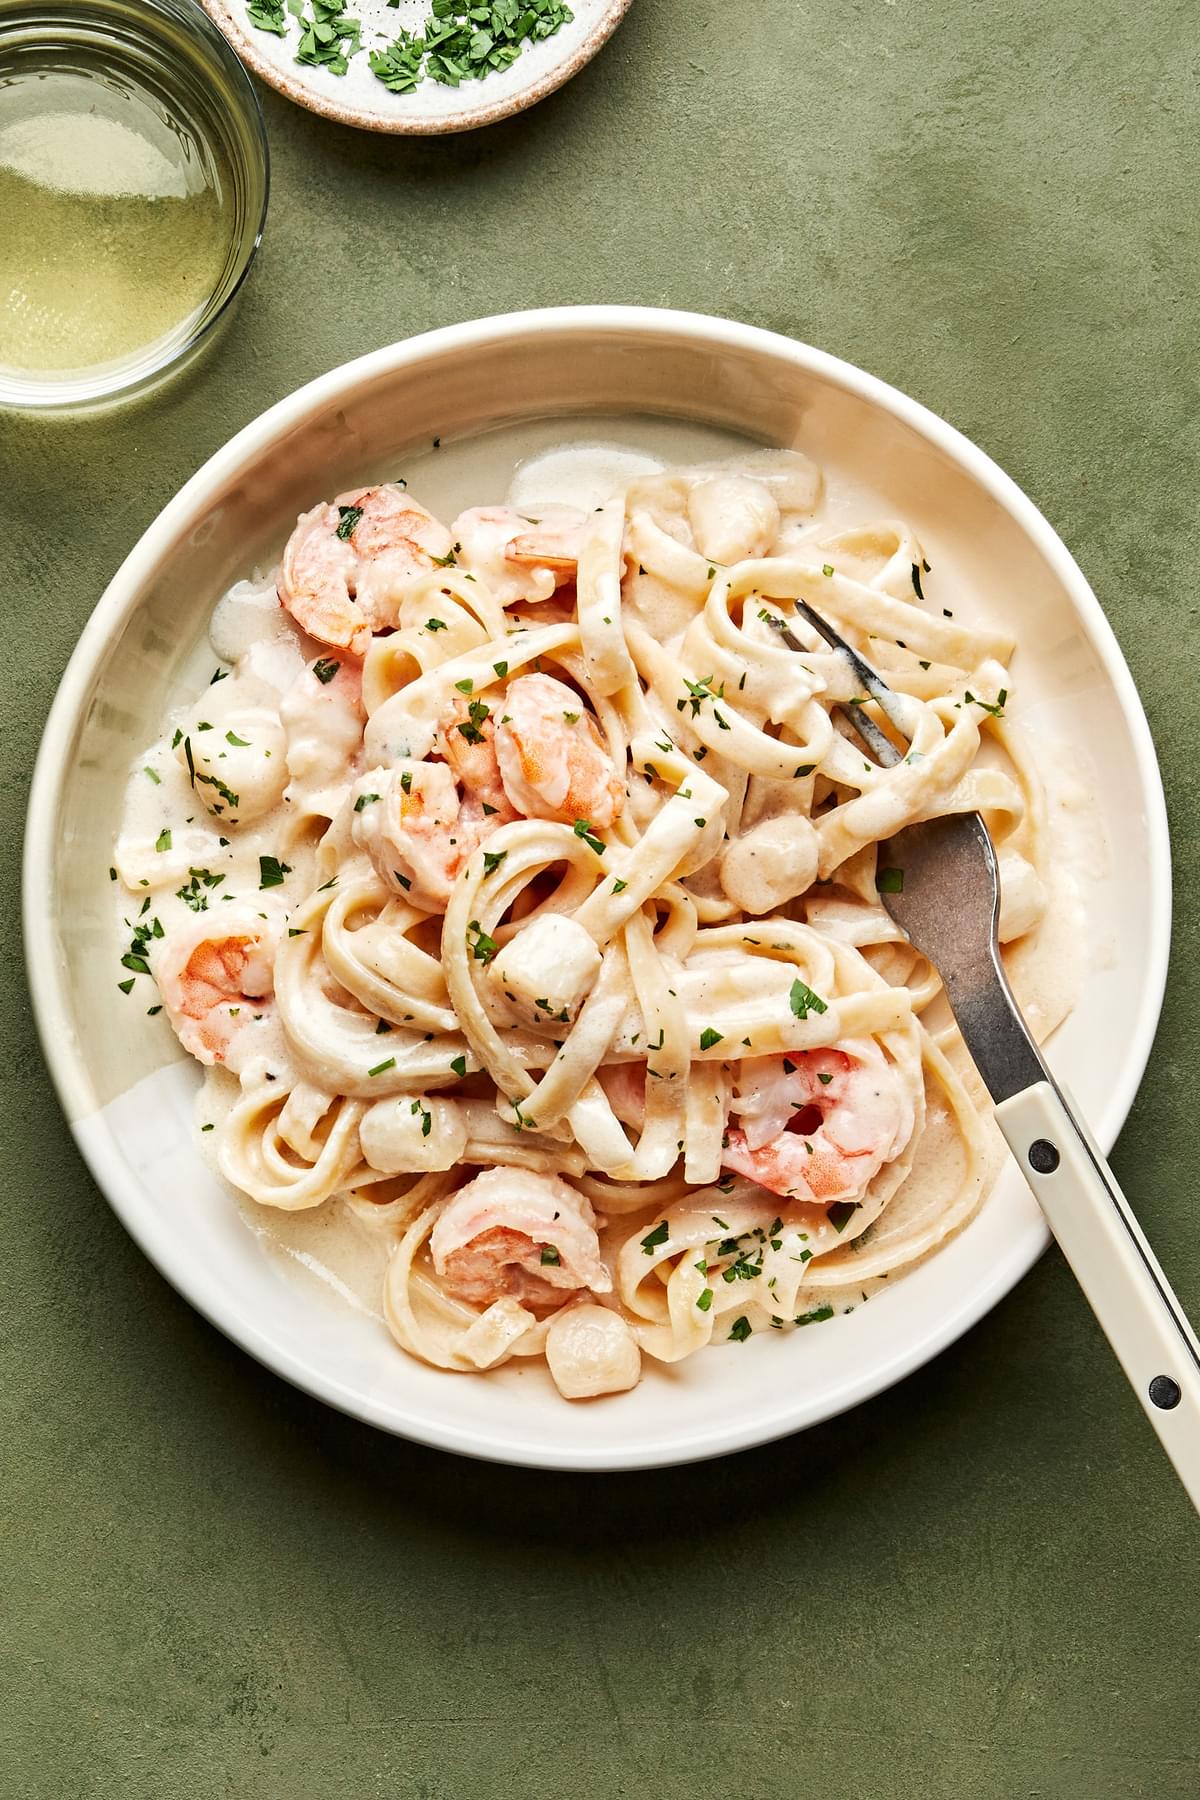 a bowl of homemade seafood fettuccine alfredo made with shrimp and scallops, sprinkled with parsley